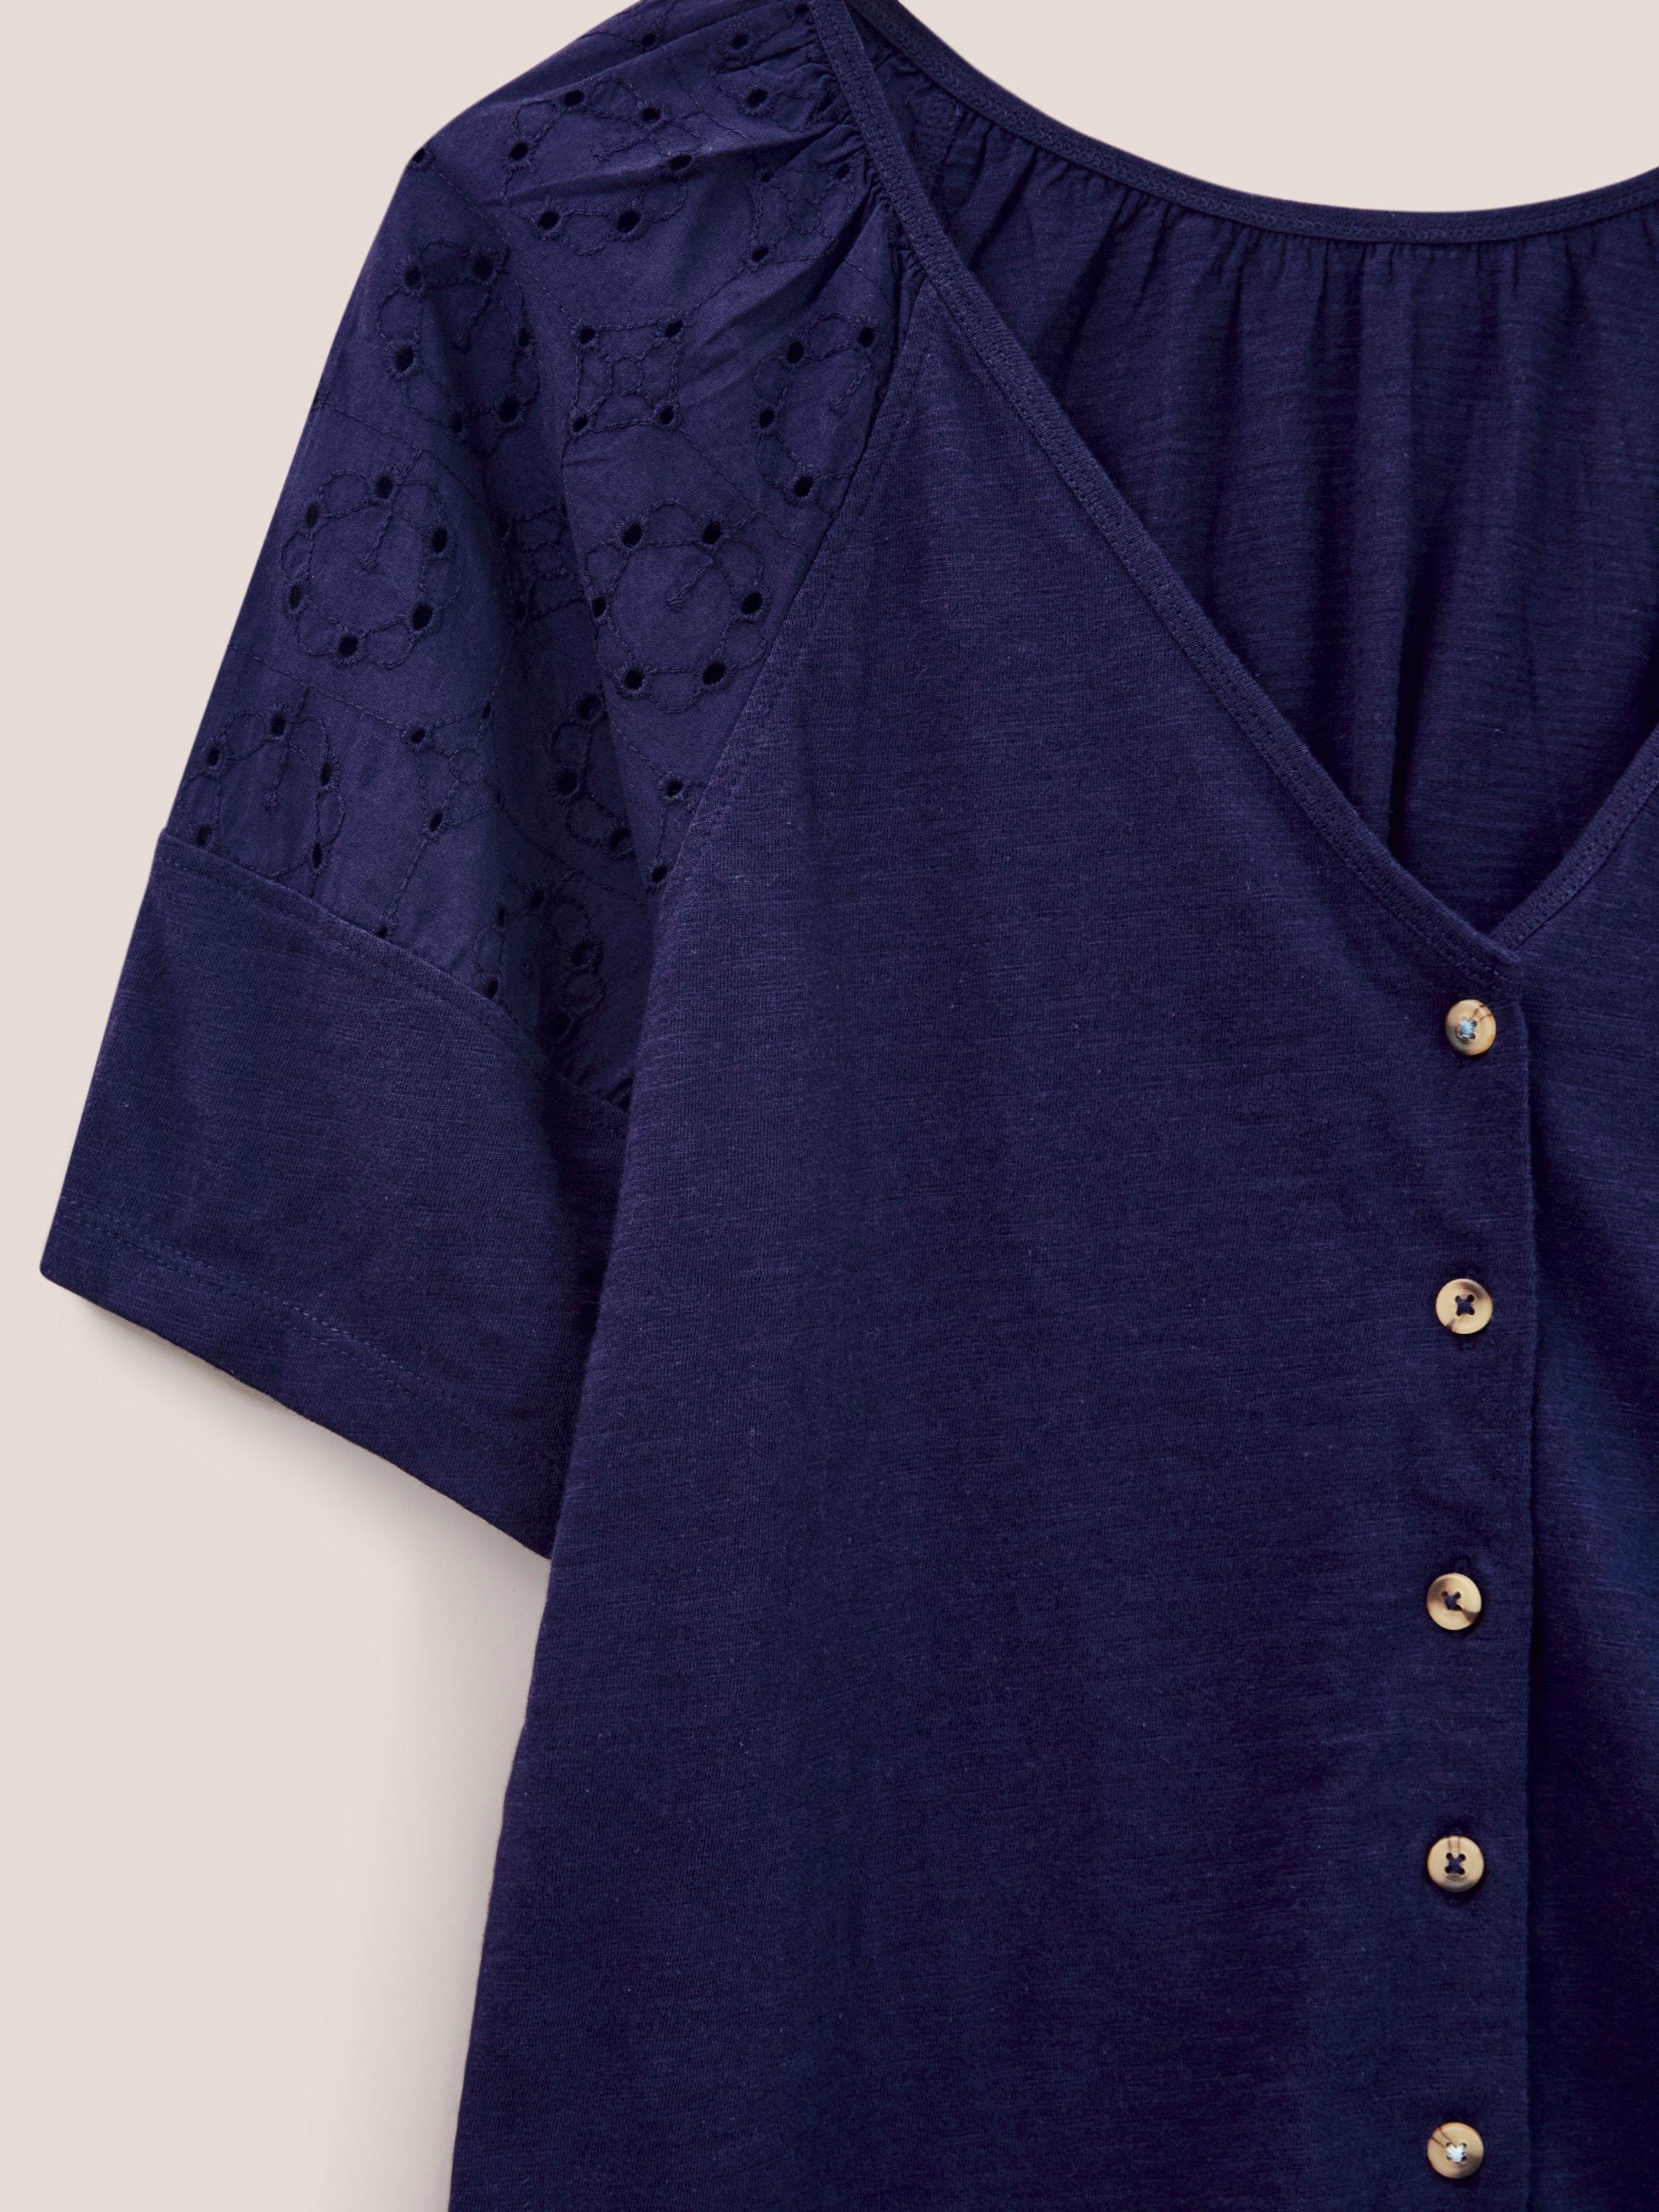 BRODERIE MIX TWO WAY TOP in FR NAVY - FLAT DETAIL